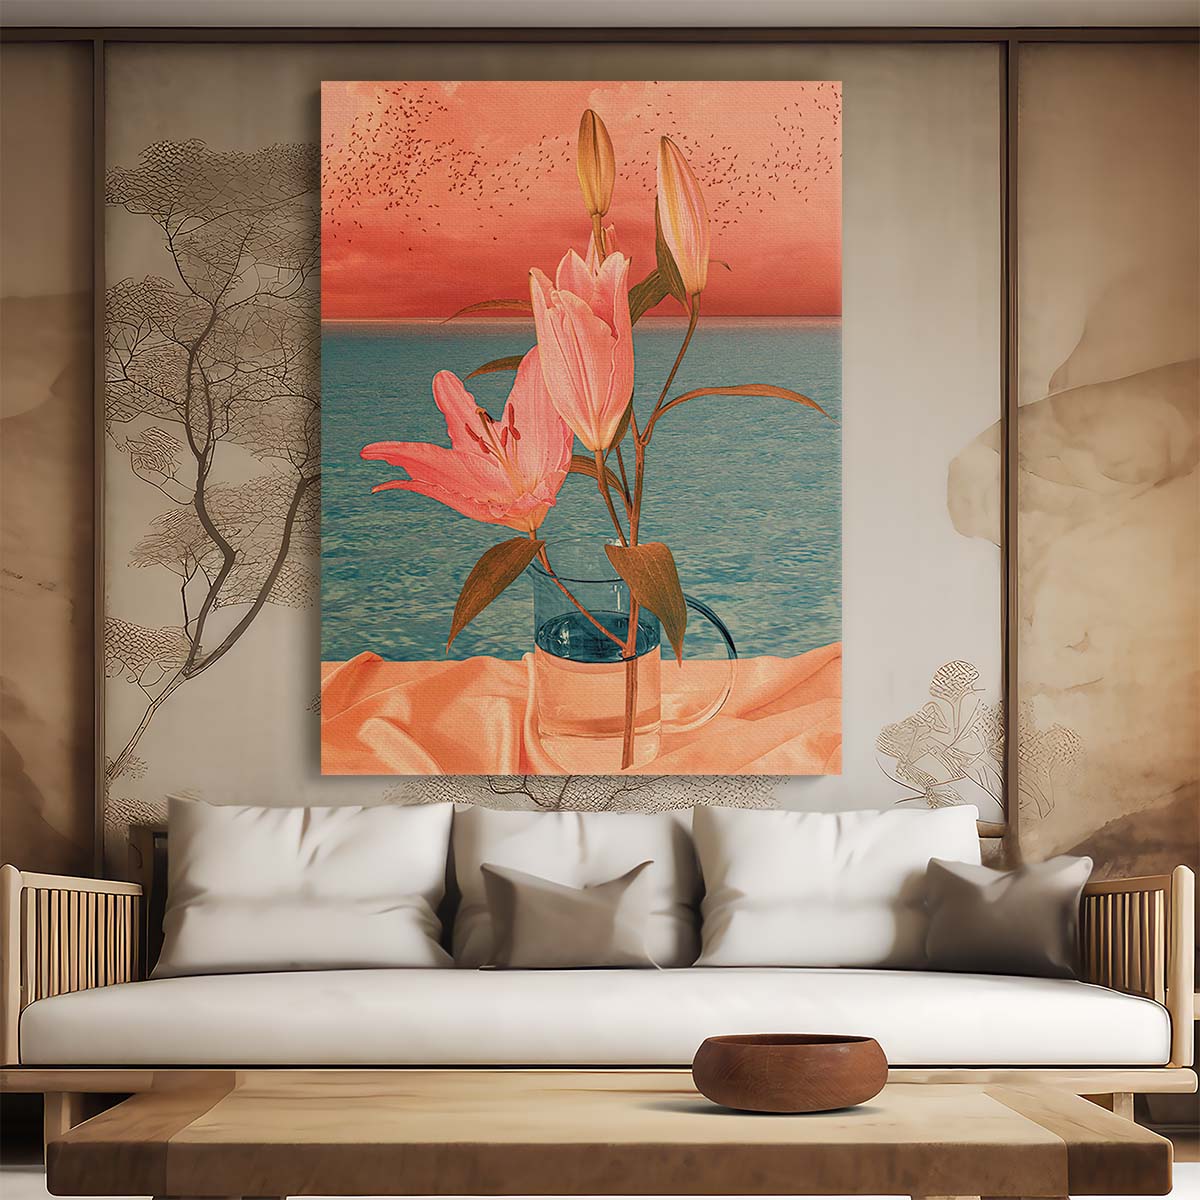 Floral Surrealism Pink Flowers with Bird in Vase Photography Art by Luxuriance Designs, made in USA